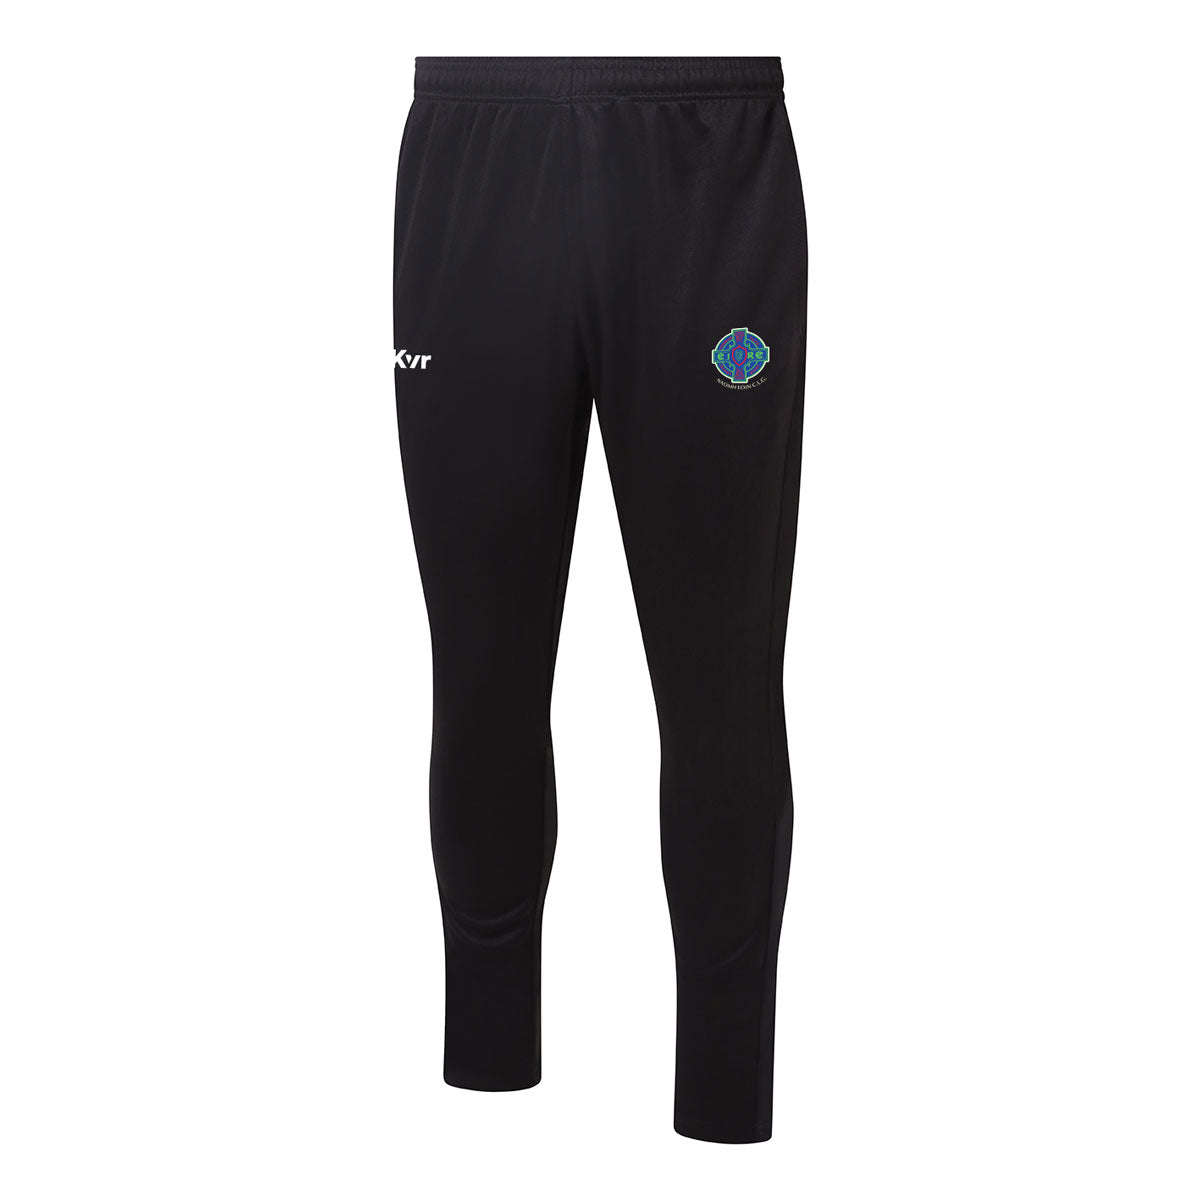 Mc Keever Naomh Eoin CLG Core 22 Skinny Pants - Youth - Black